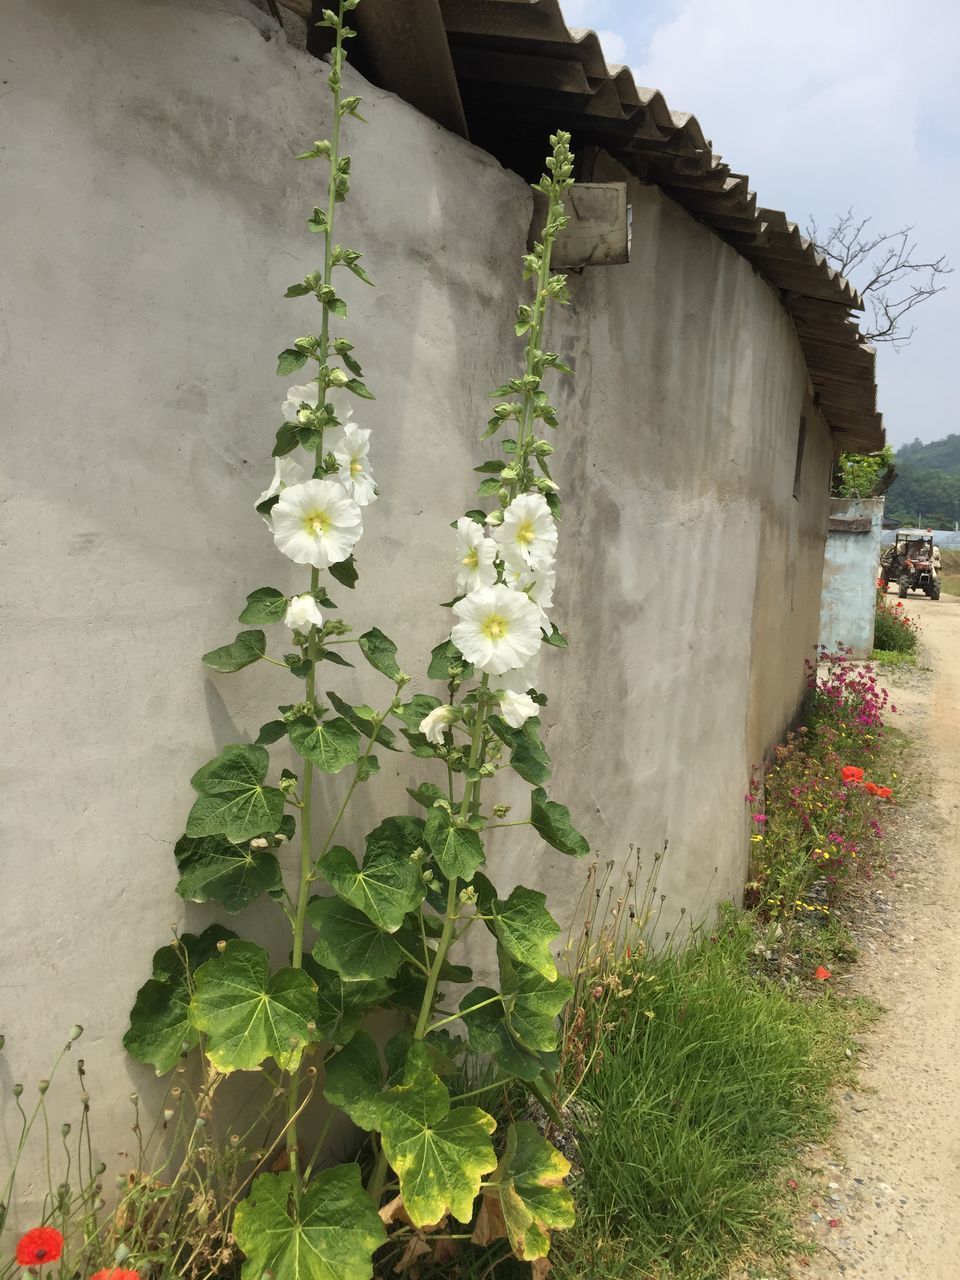 CLOSE-UP OF FLOWERING PLANT AGAINST WALL AND BUILDING